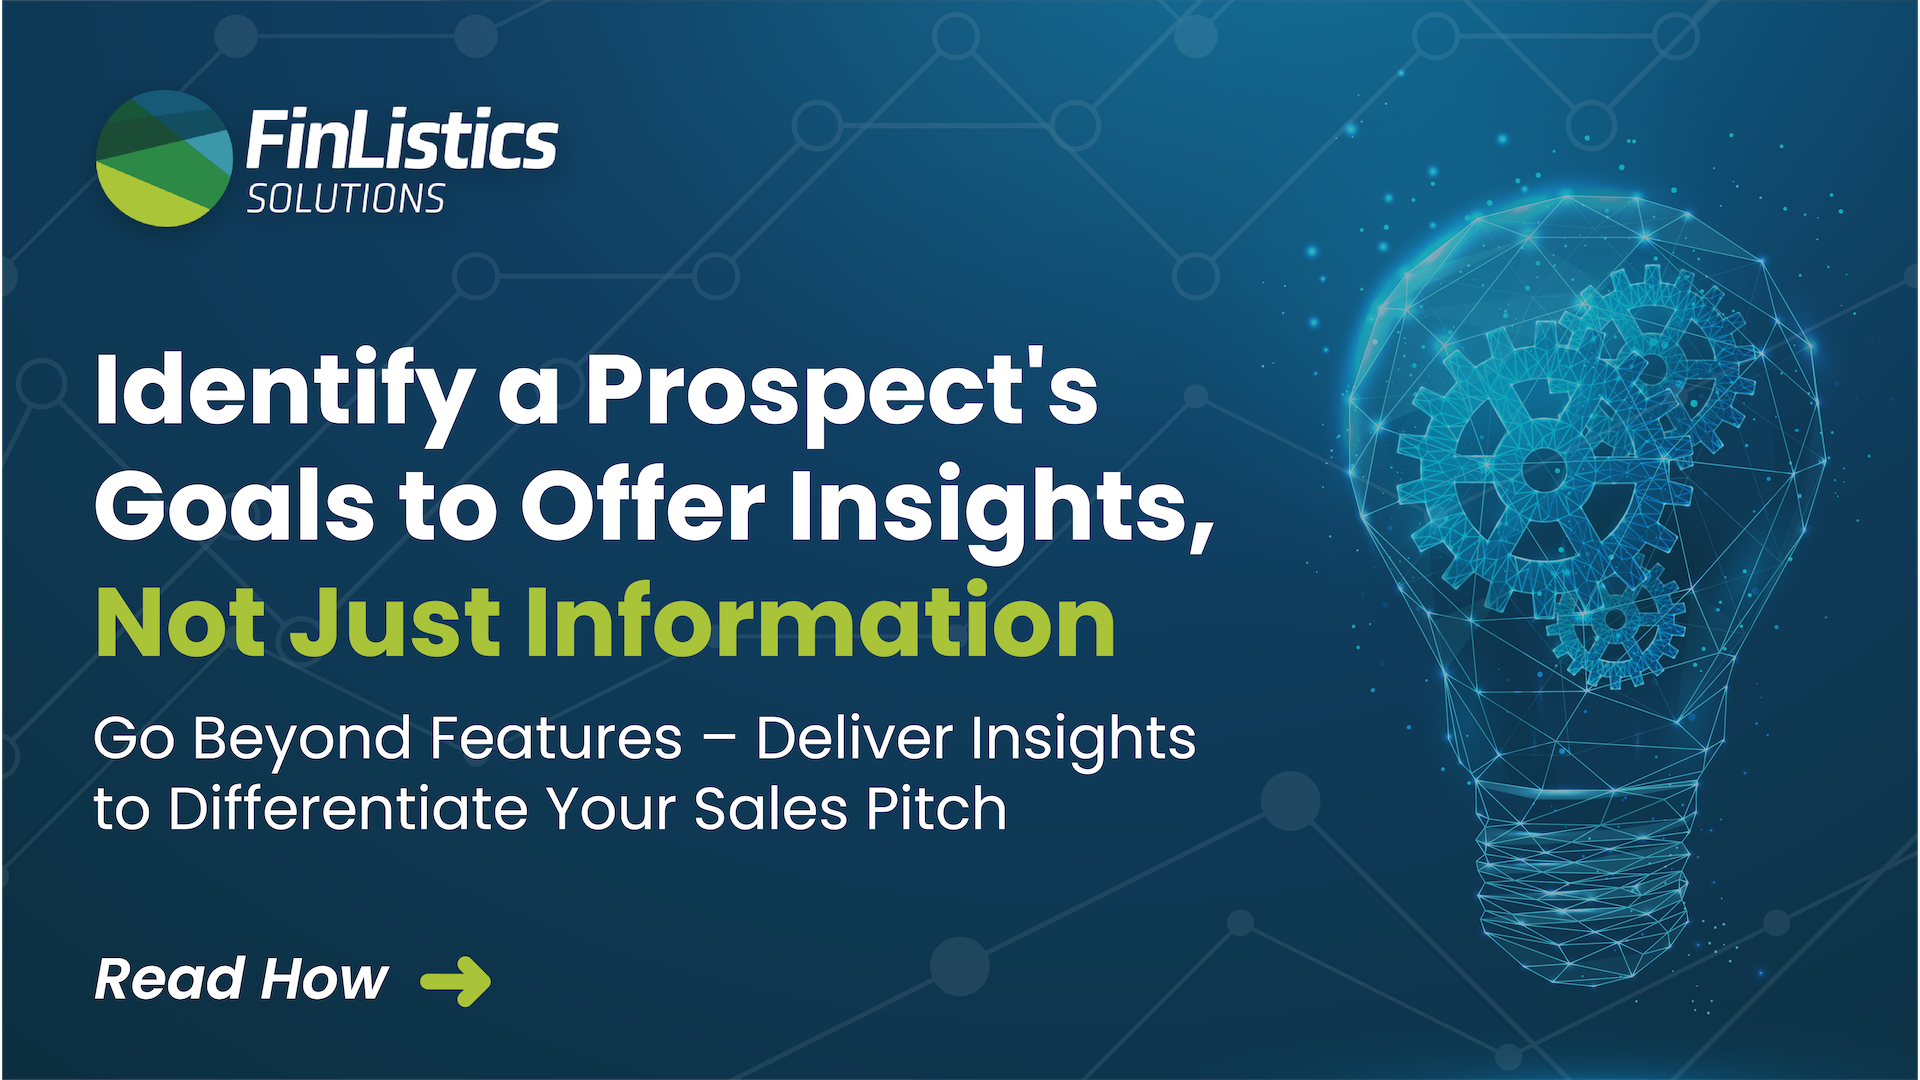 Identify a Prospect's Goals to Offer Insights, Not Just Information Blog Post